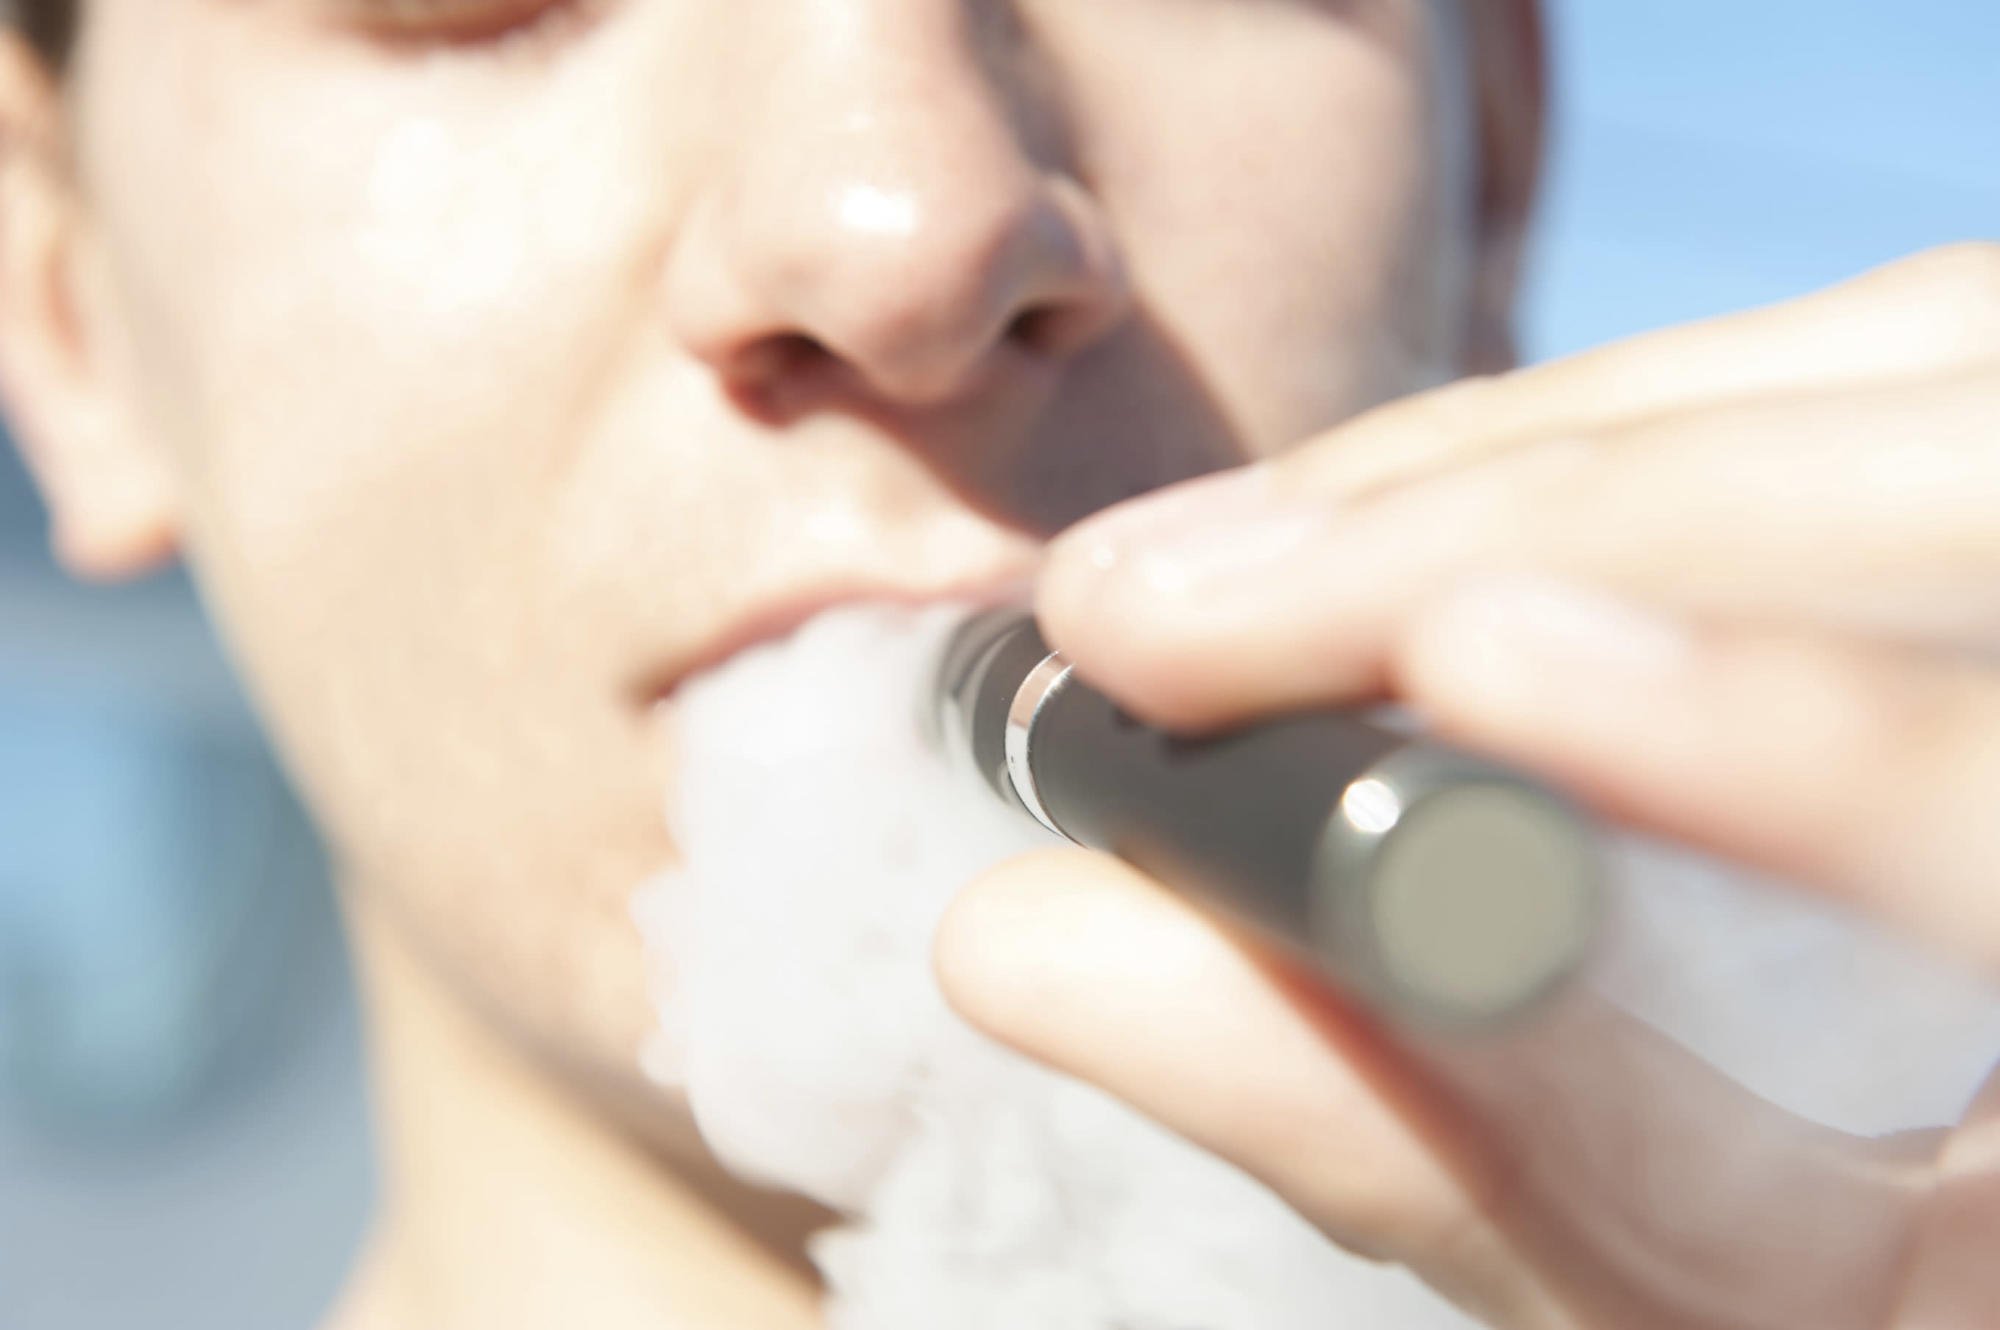 Vaping could augment the risk of developing asthma